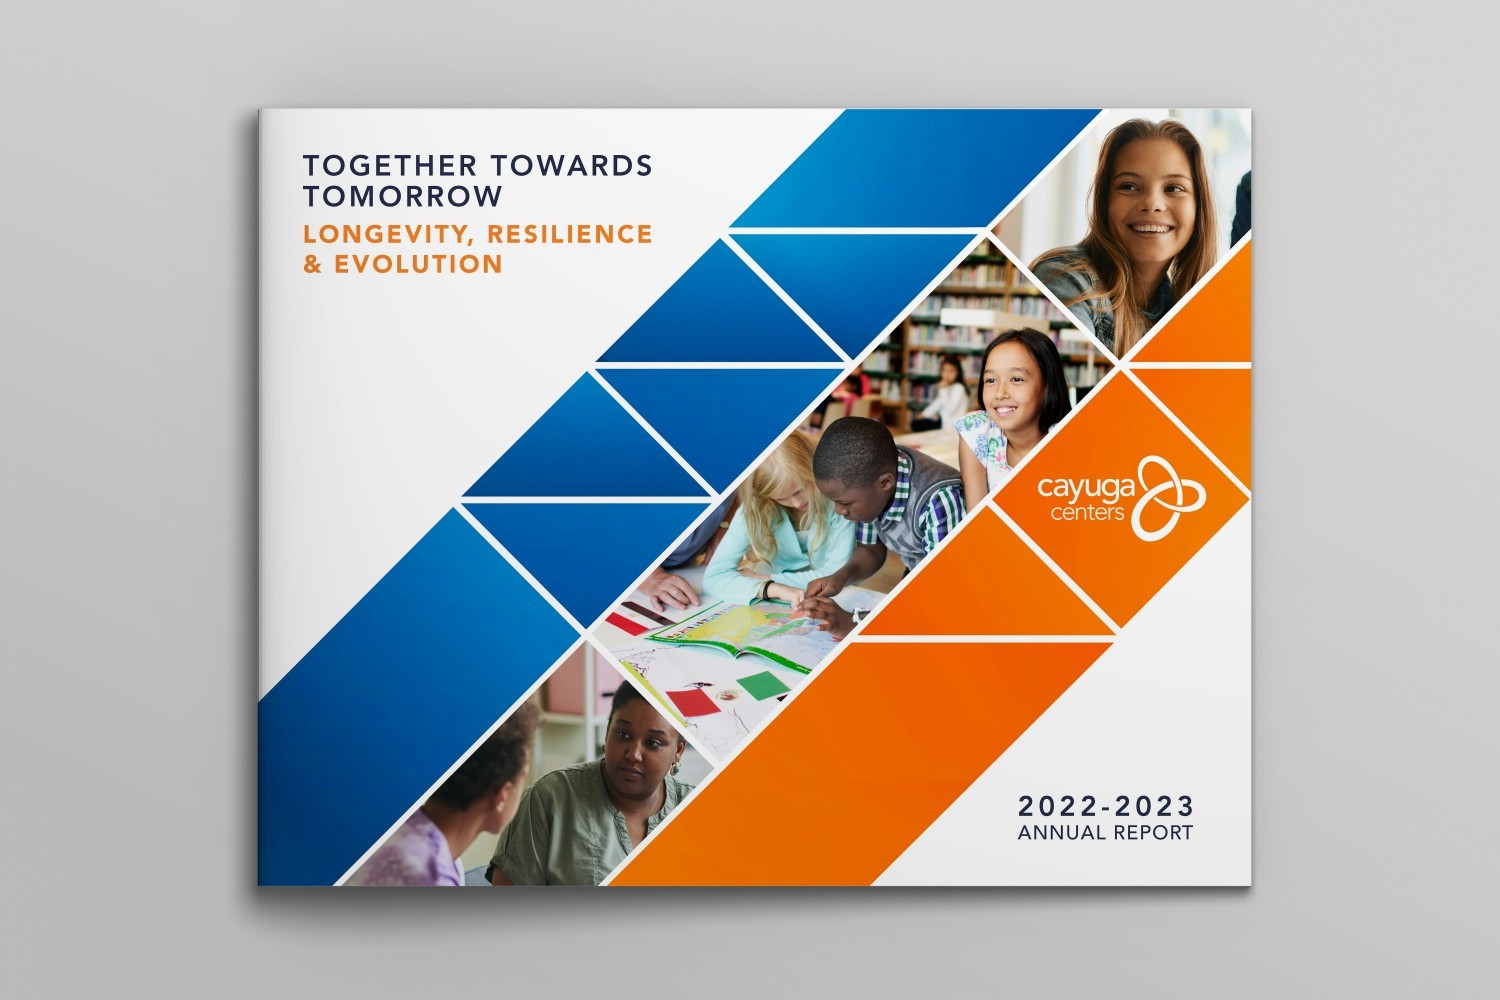 Our 2022-2023 award-winning Annual Report: 